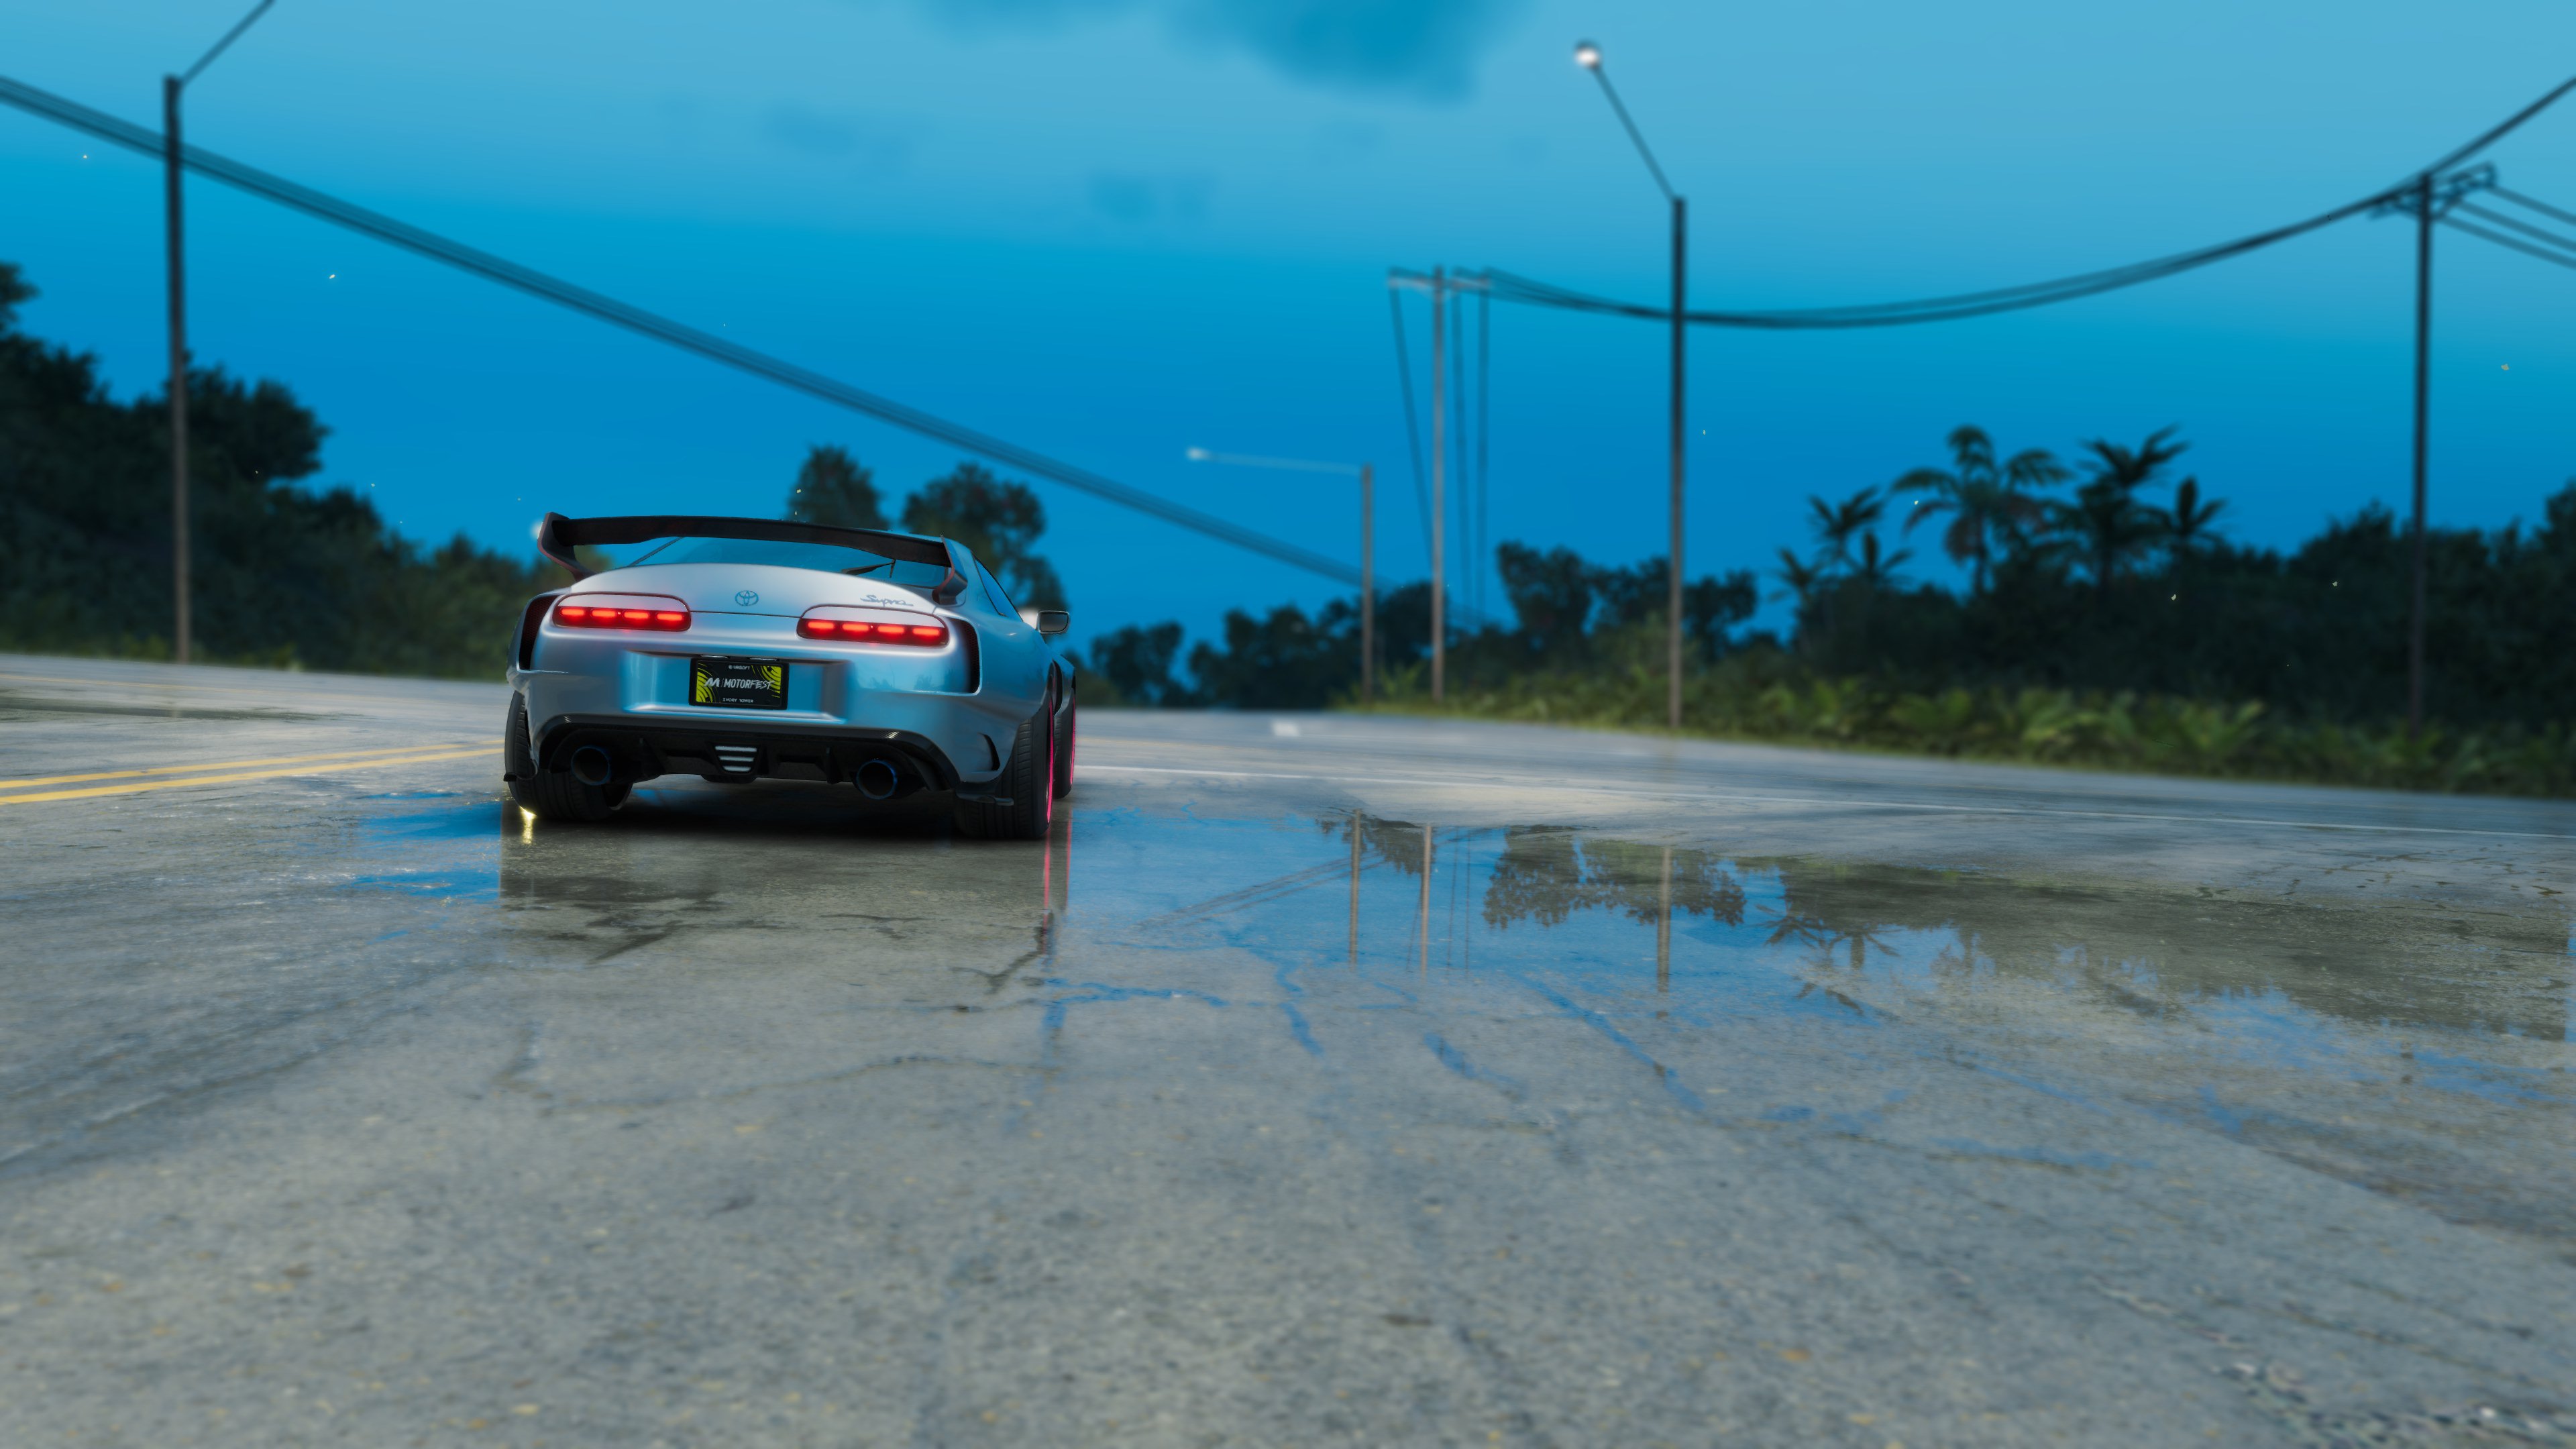 General 3840x2160 The Crew car Toyota Supra screen shot Hawaii night tuning CGI video game art vehicle rear view taillights reflection sky clouds palm trees